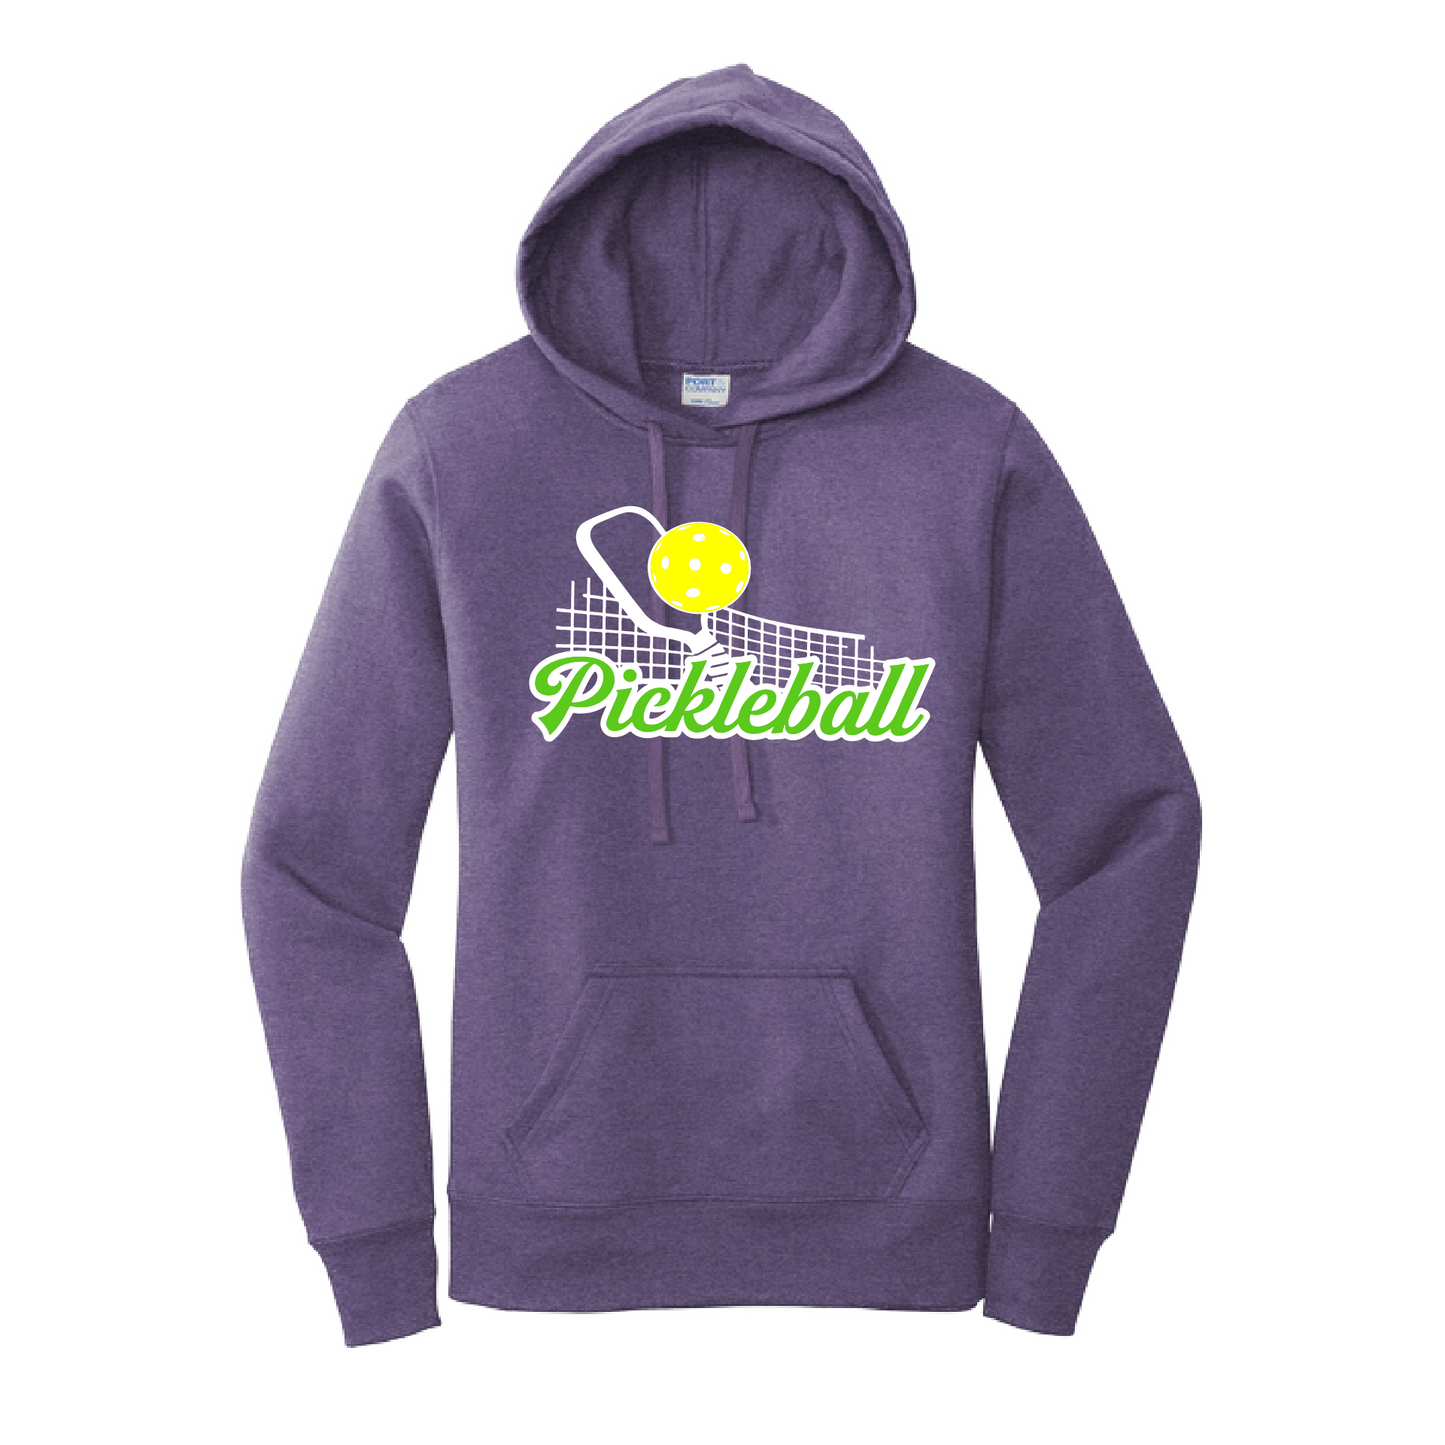 Pickleball Design: Pickleball and Net  Women's Hooded pullover Sweatshirt  Turn up the volume in this Women's Sweatshirts with its perfect mix of softness and attitude. Ultra soft lined inside with a lined hood also. This is fitted nicely for a women's figure. Front pouch pocket.